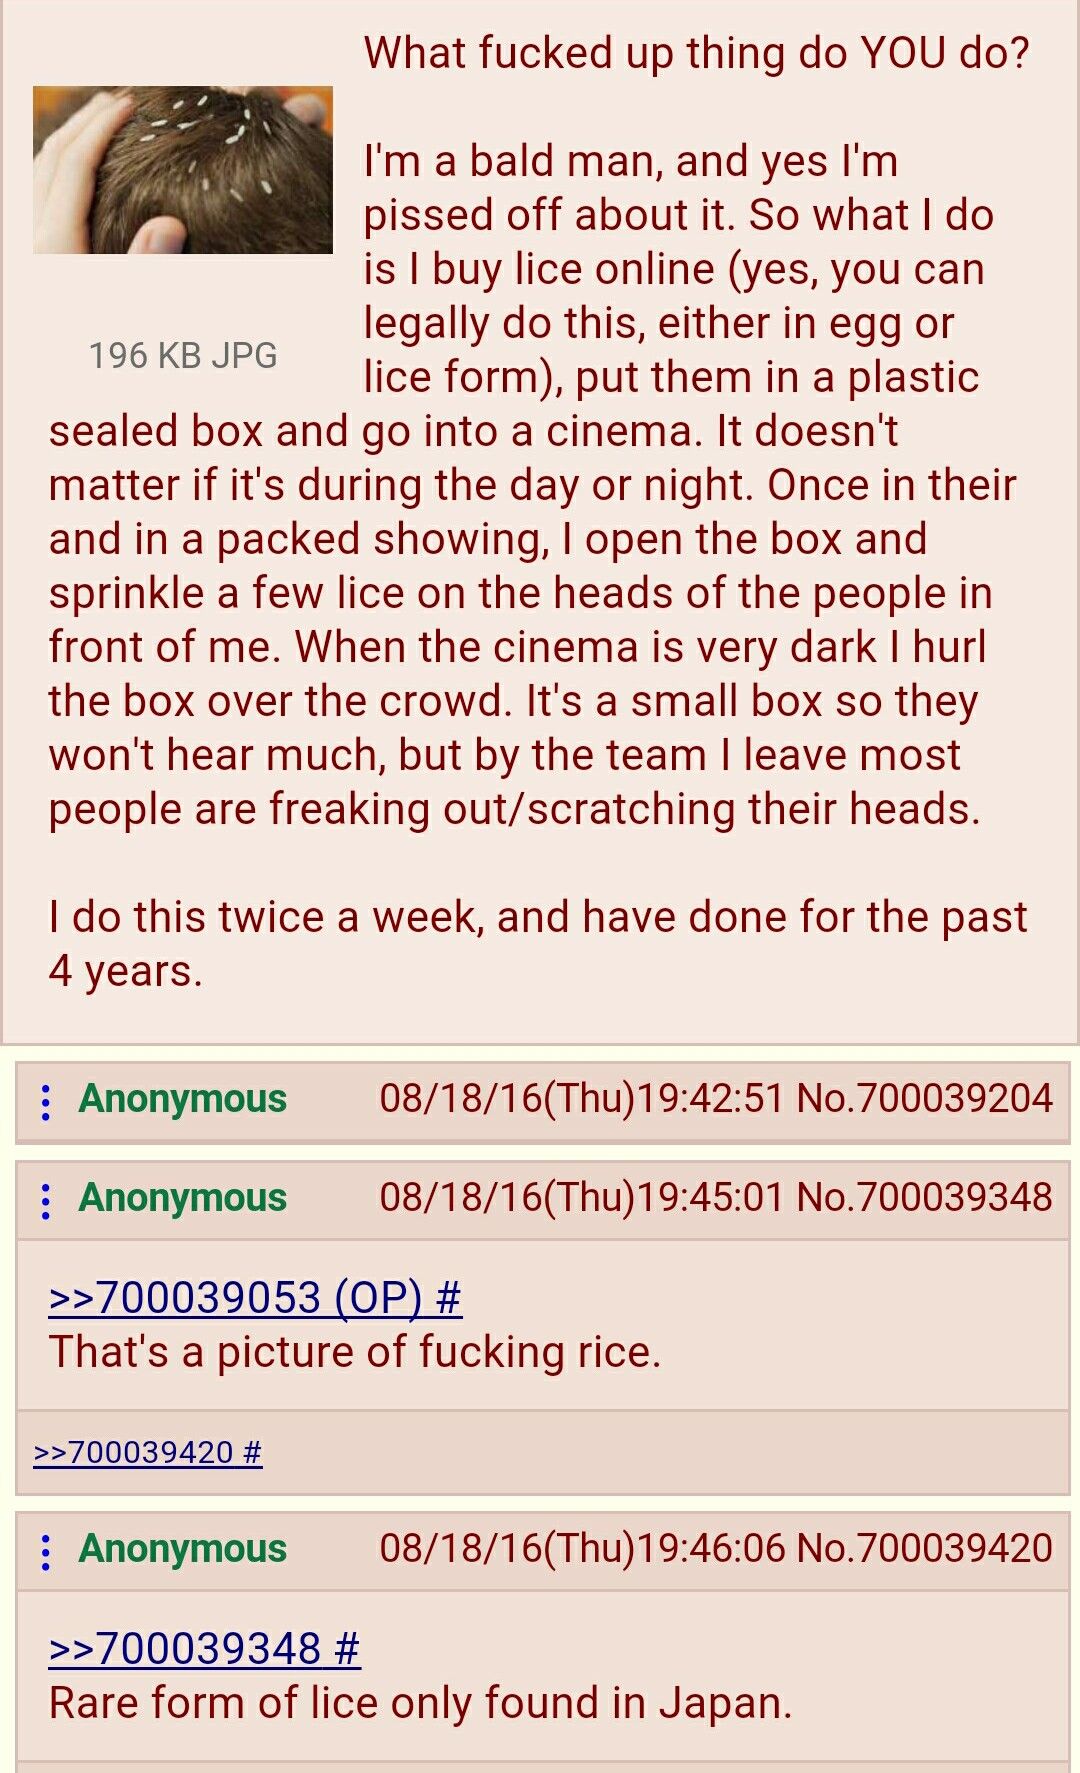 Anon is a lice expert